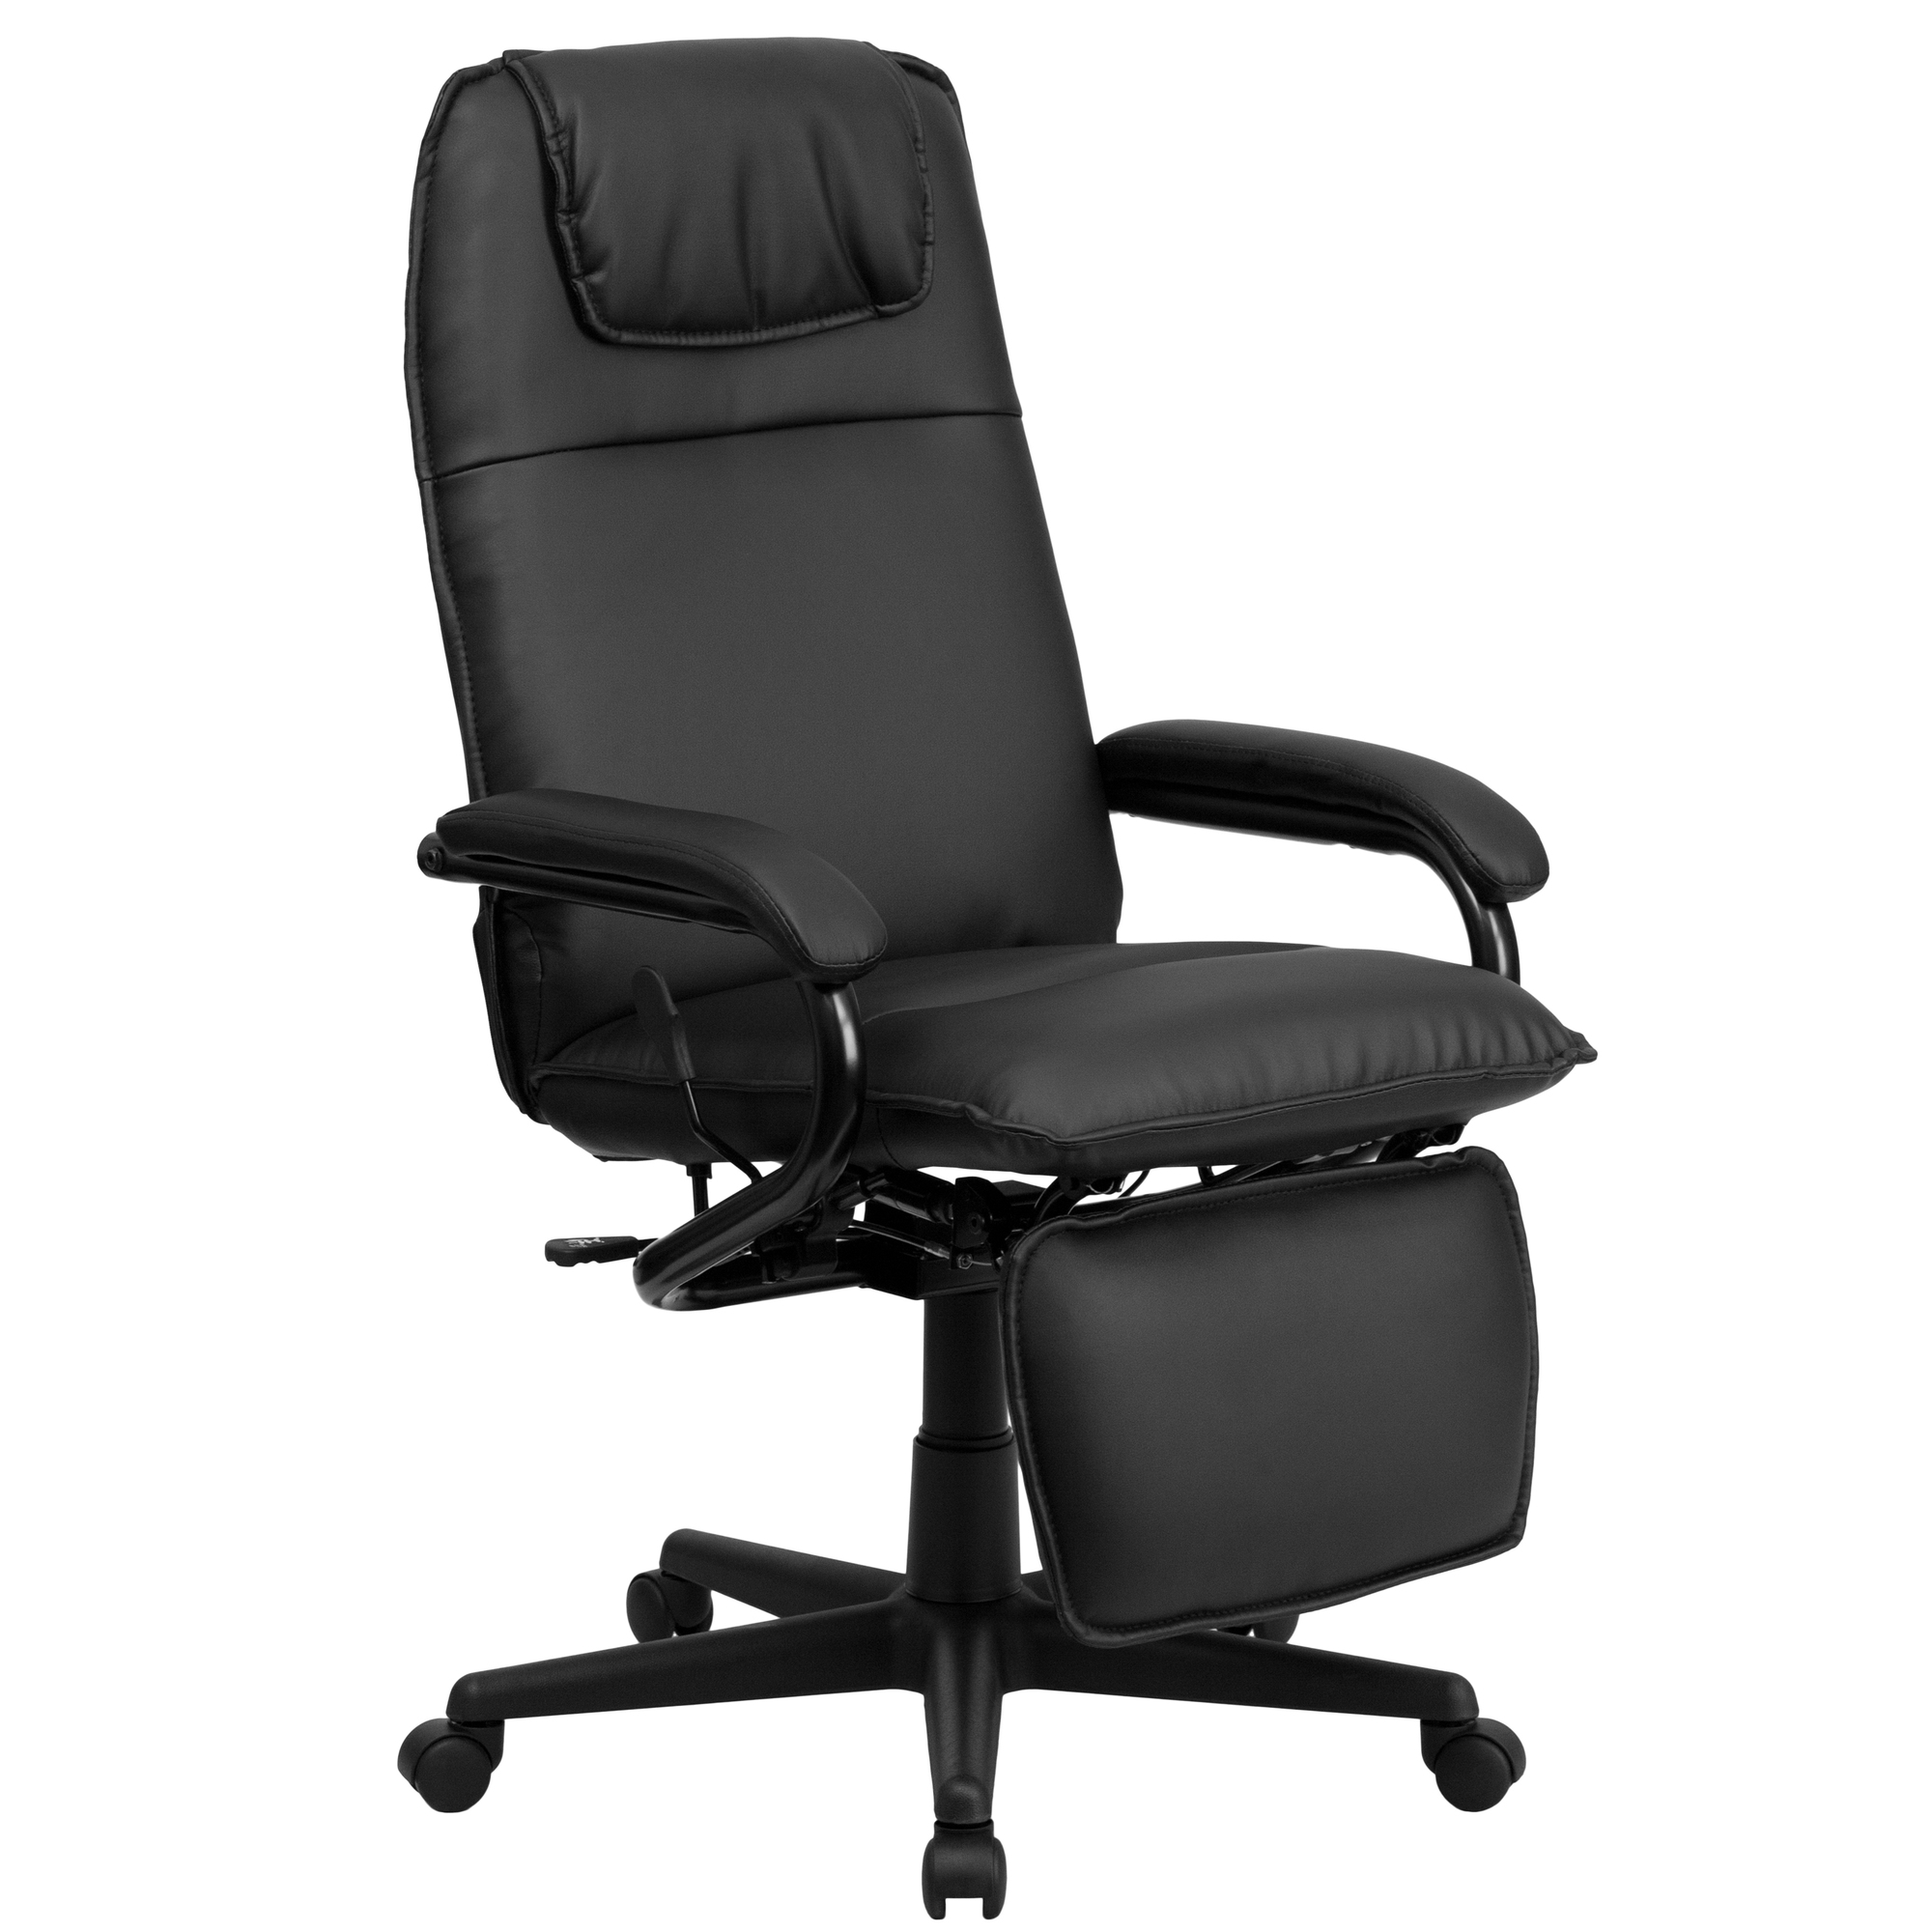 Flash Furniture, High Back Black LeatherSoft Office Chair with Arms, Primary Color Black, Included (qty.) 1, Model BT70172BK -  BT-70172-BK-GG